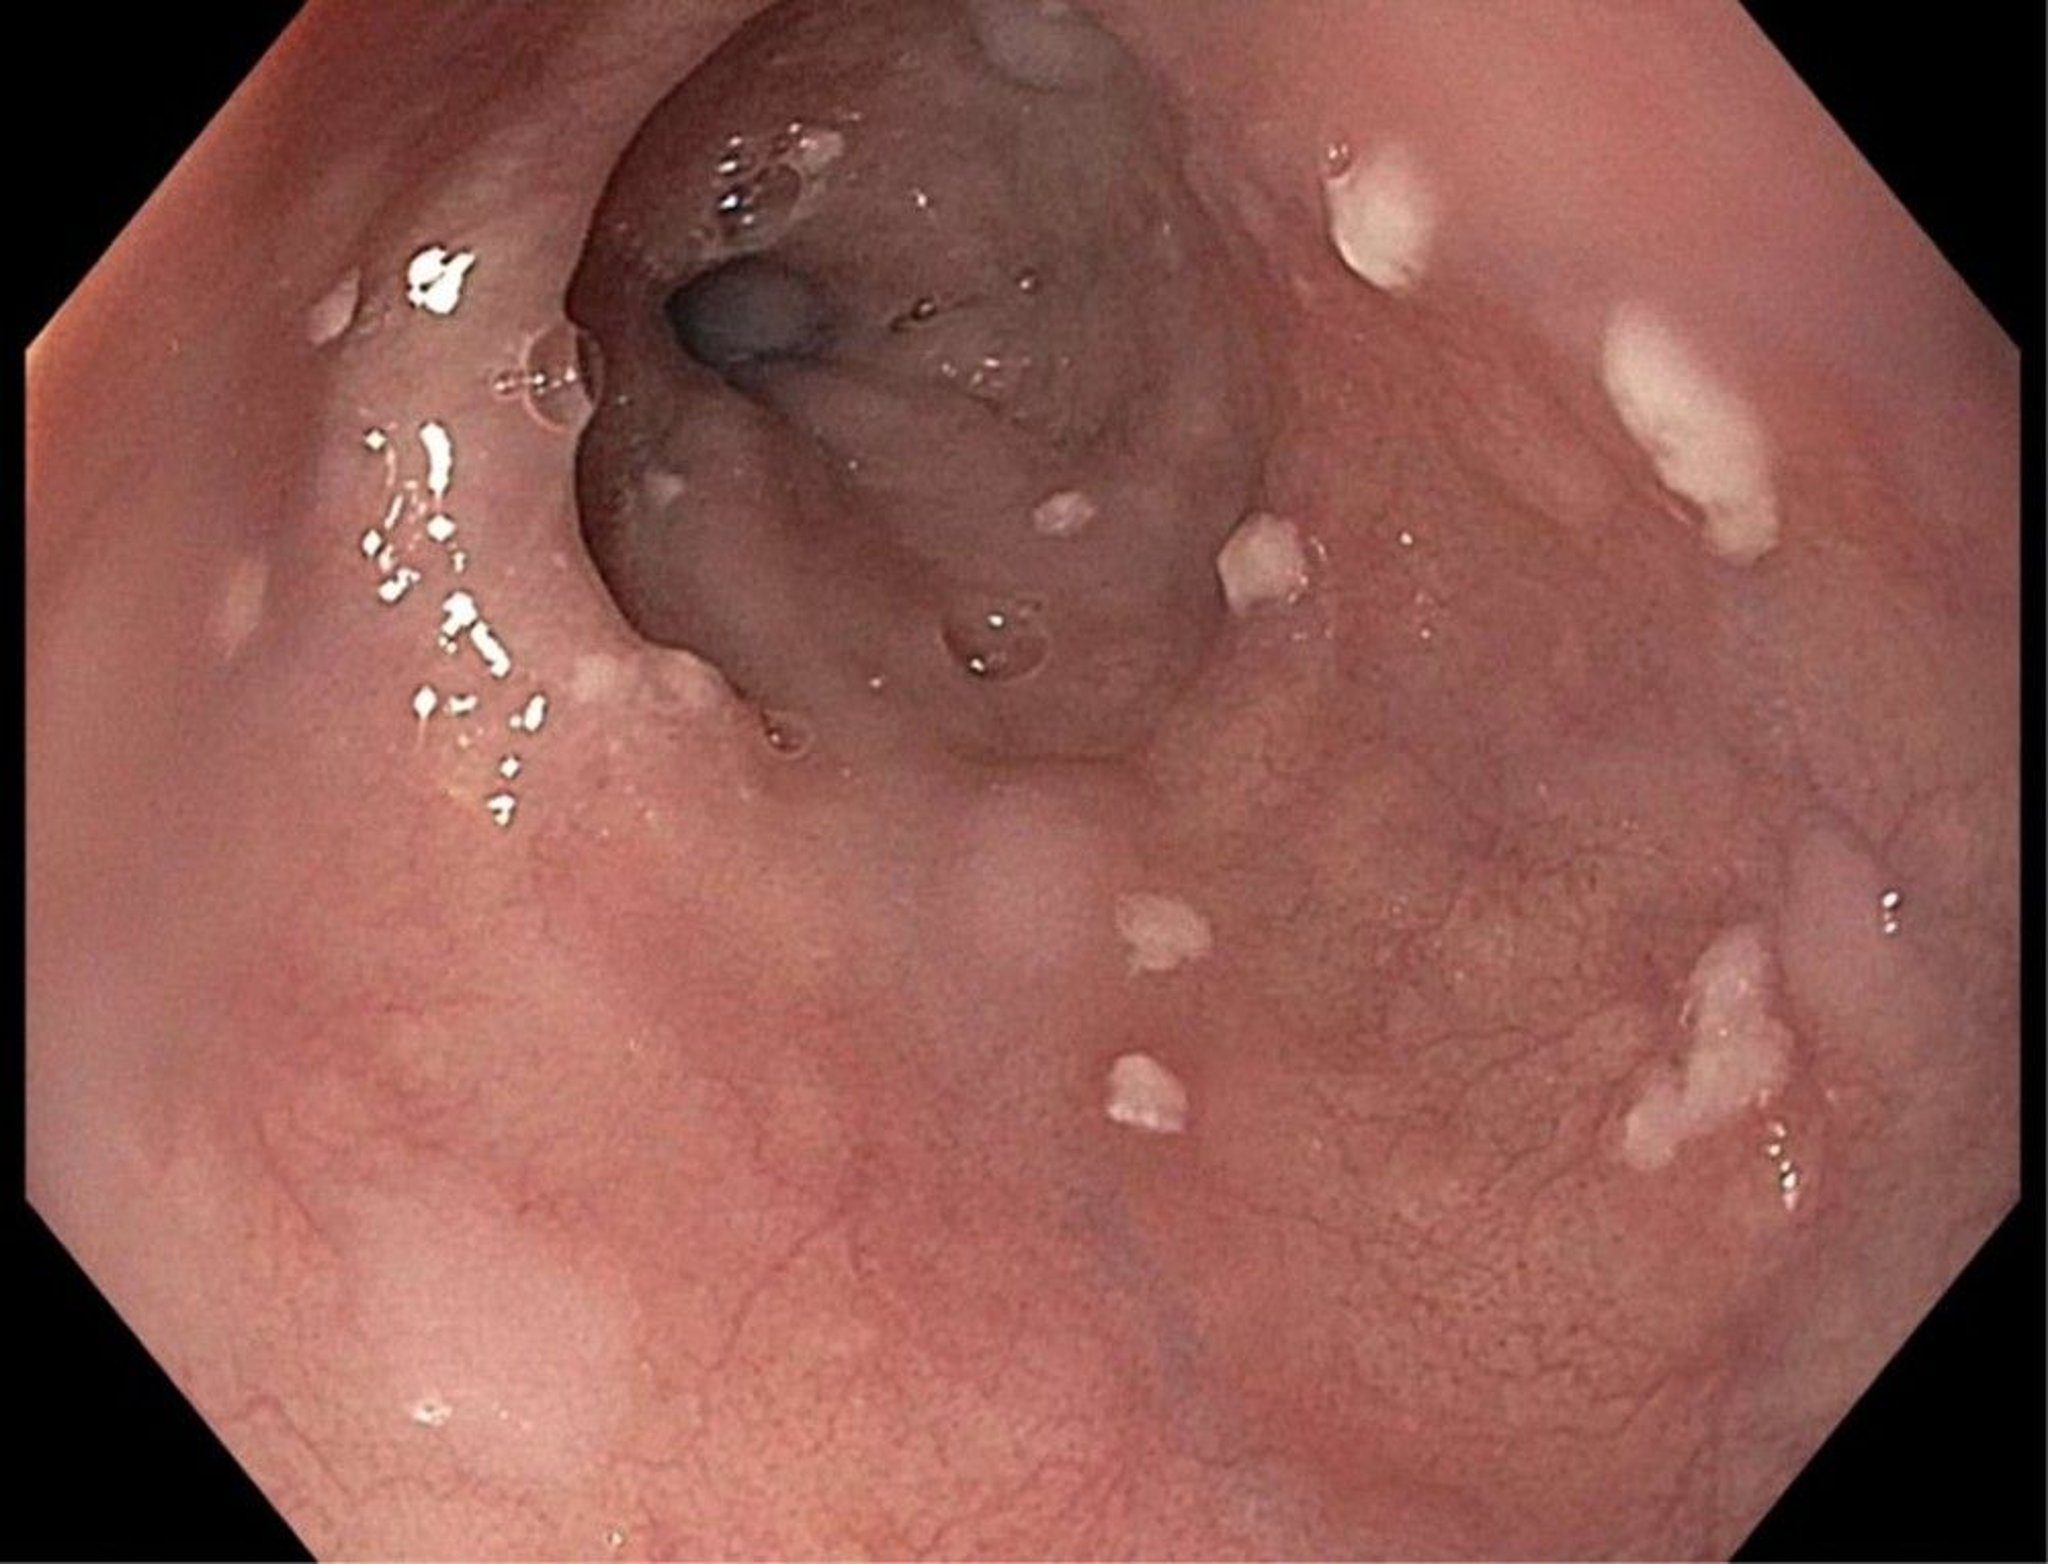 Infection of the Esophagus Caused by <i >Candida</i>